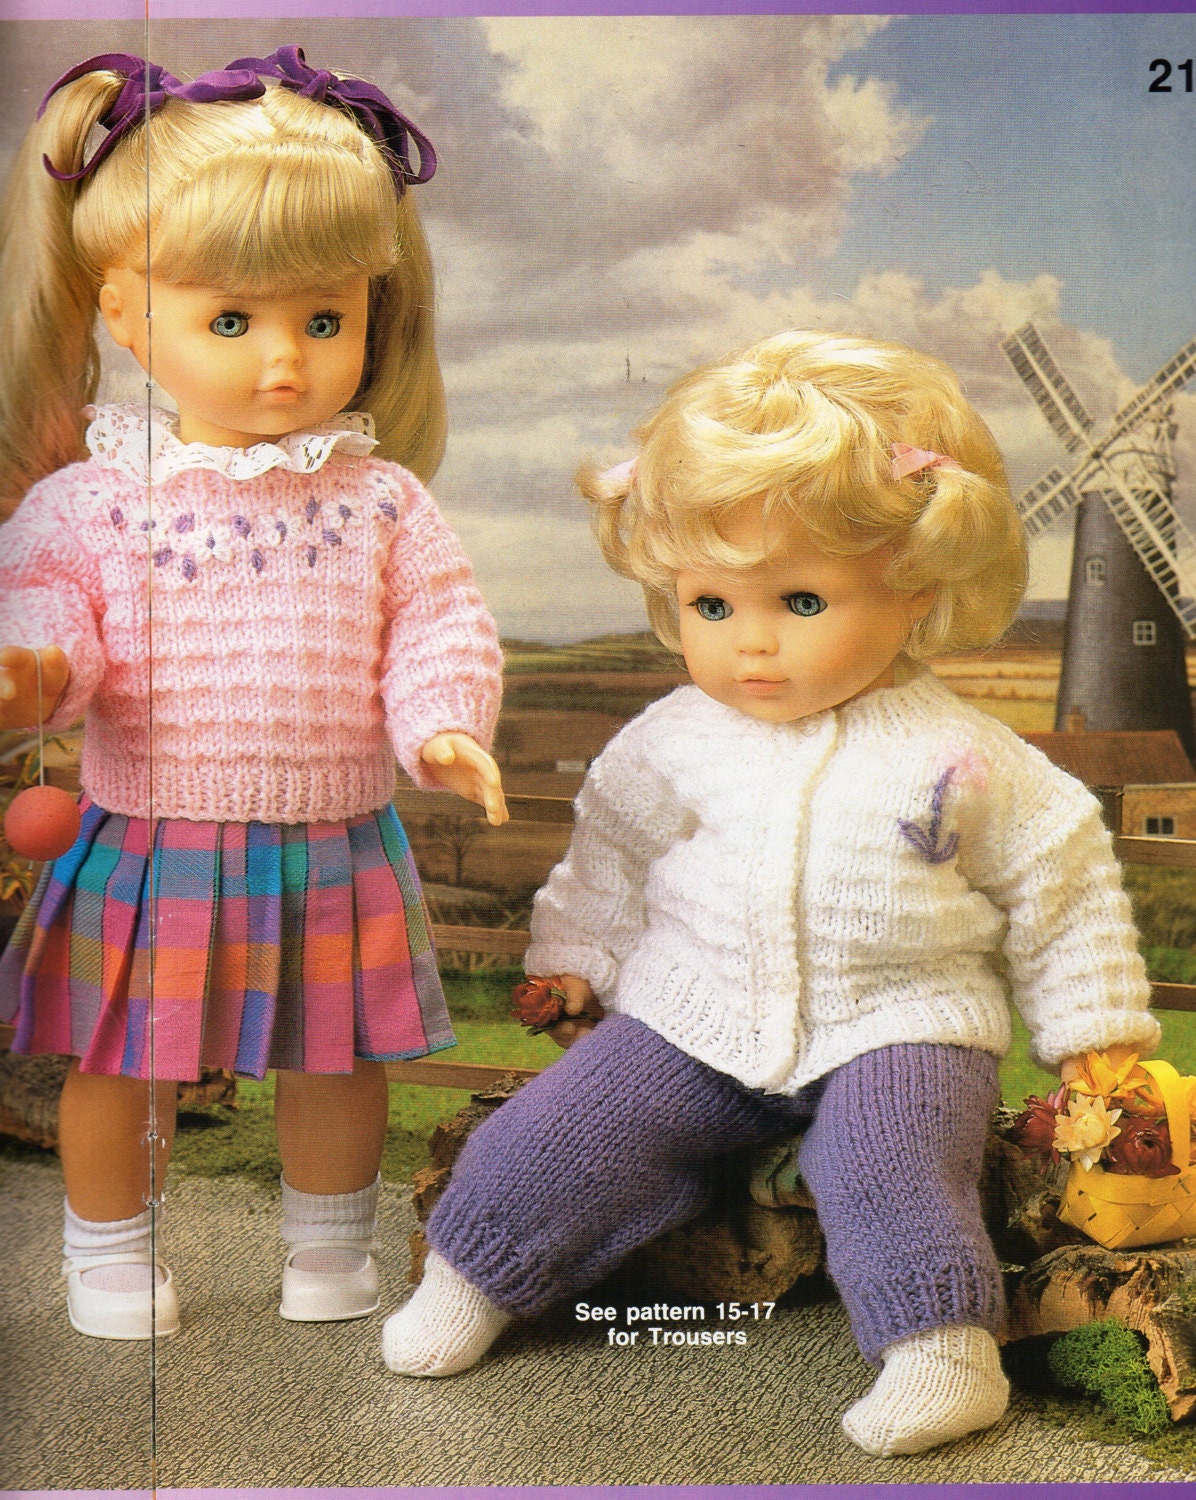 Dolls clothes knitting pattern for a 16 and 20 inch doll PDF Instant download